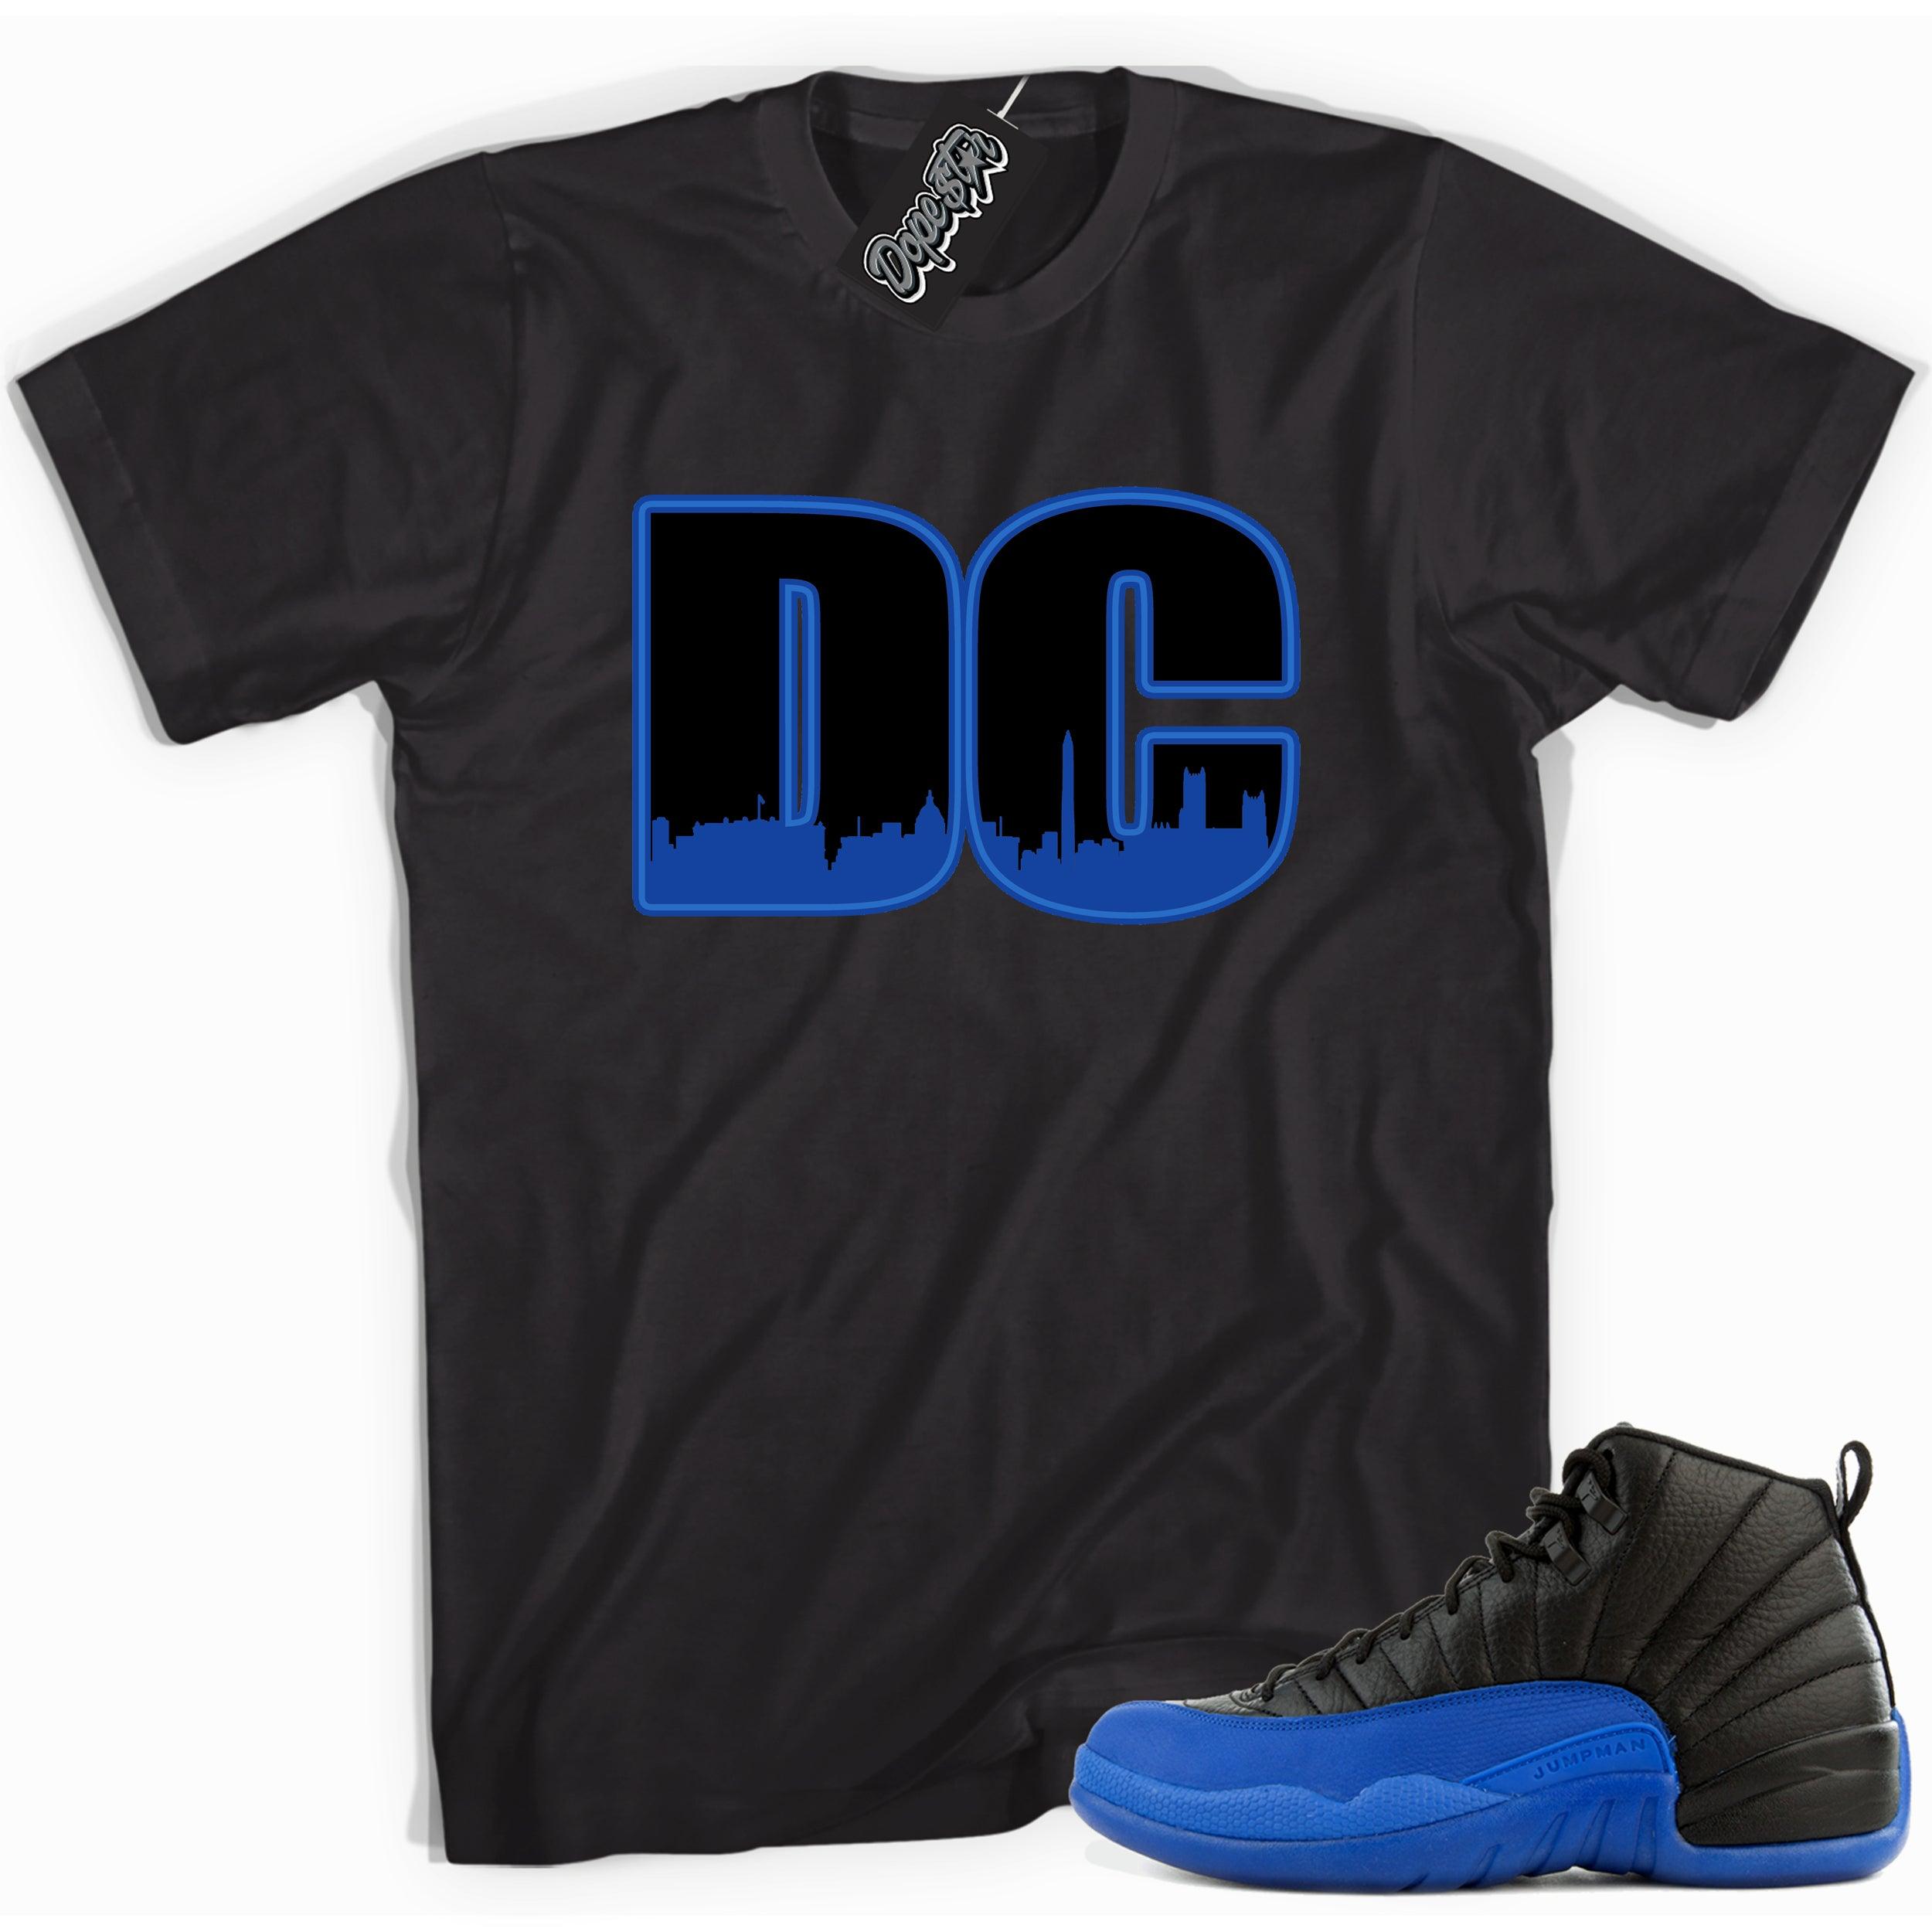 Cool black graphic tee with 'dc' print, that perfectly matches  Air Jordan 12 Retro Black Game Royal sneakers.